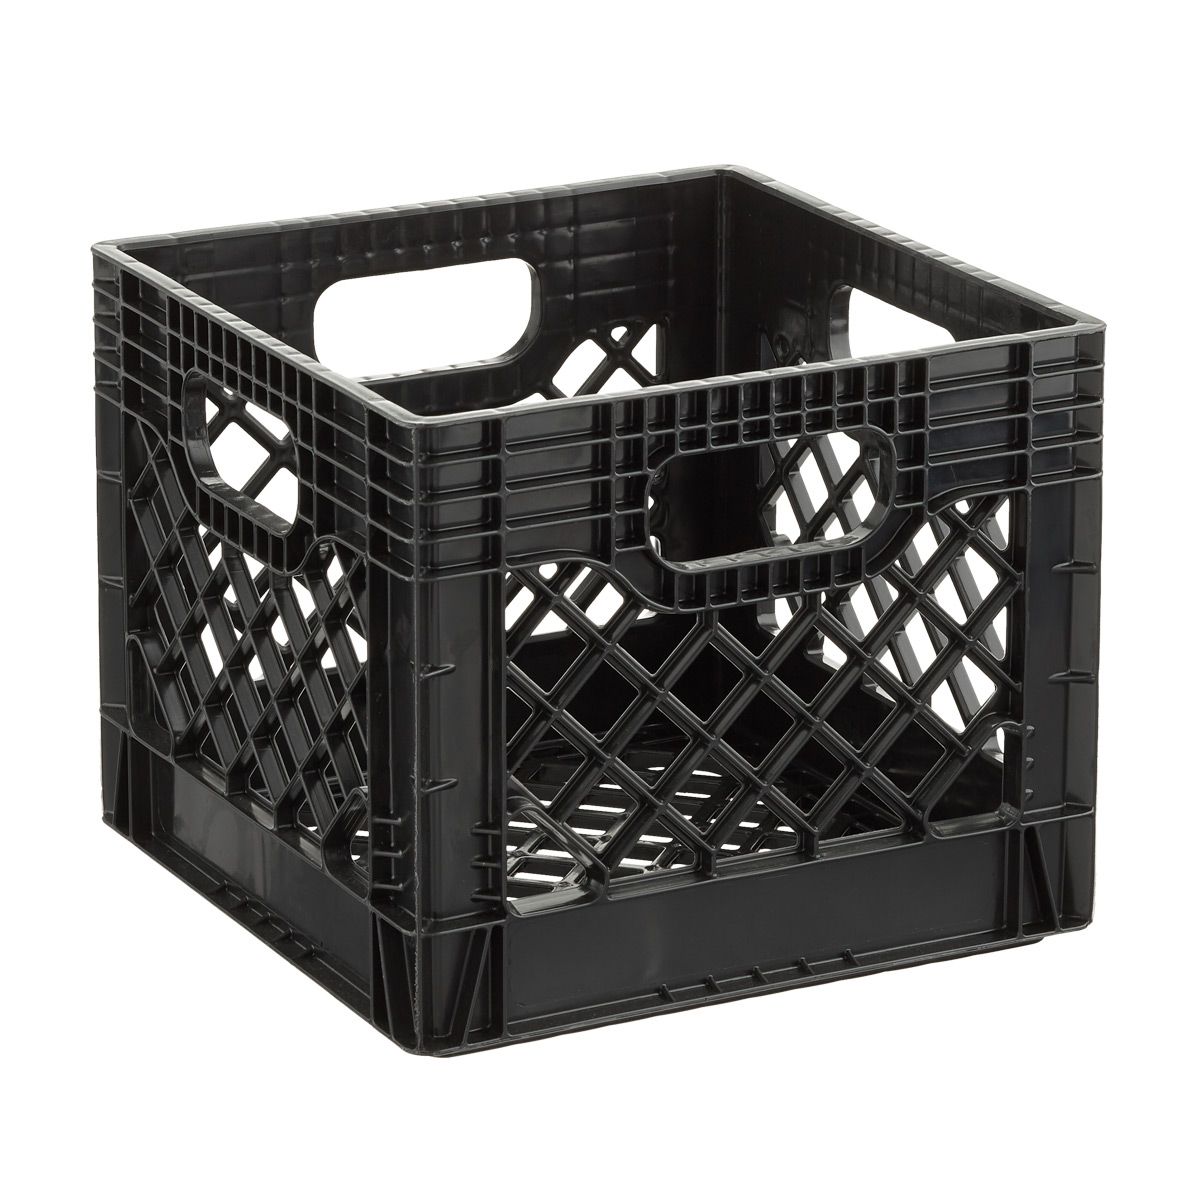 Authentic Milk Crate | The Container Store